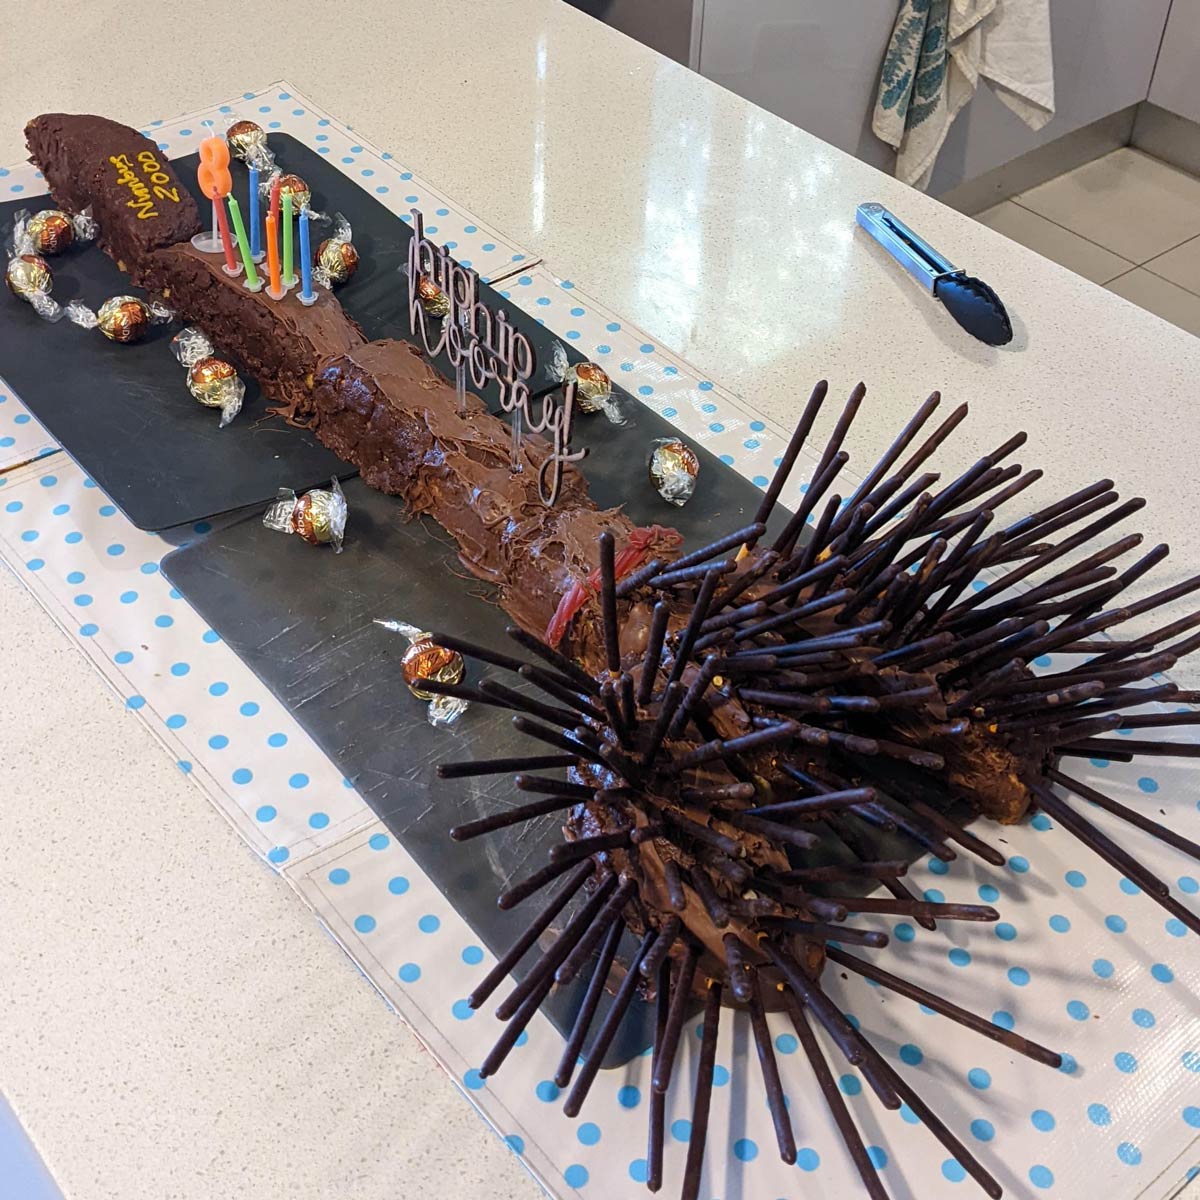 My loving wife spent hours on this Harry Potter broom cake for our kid